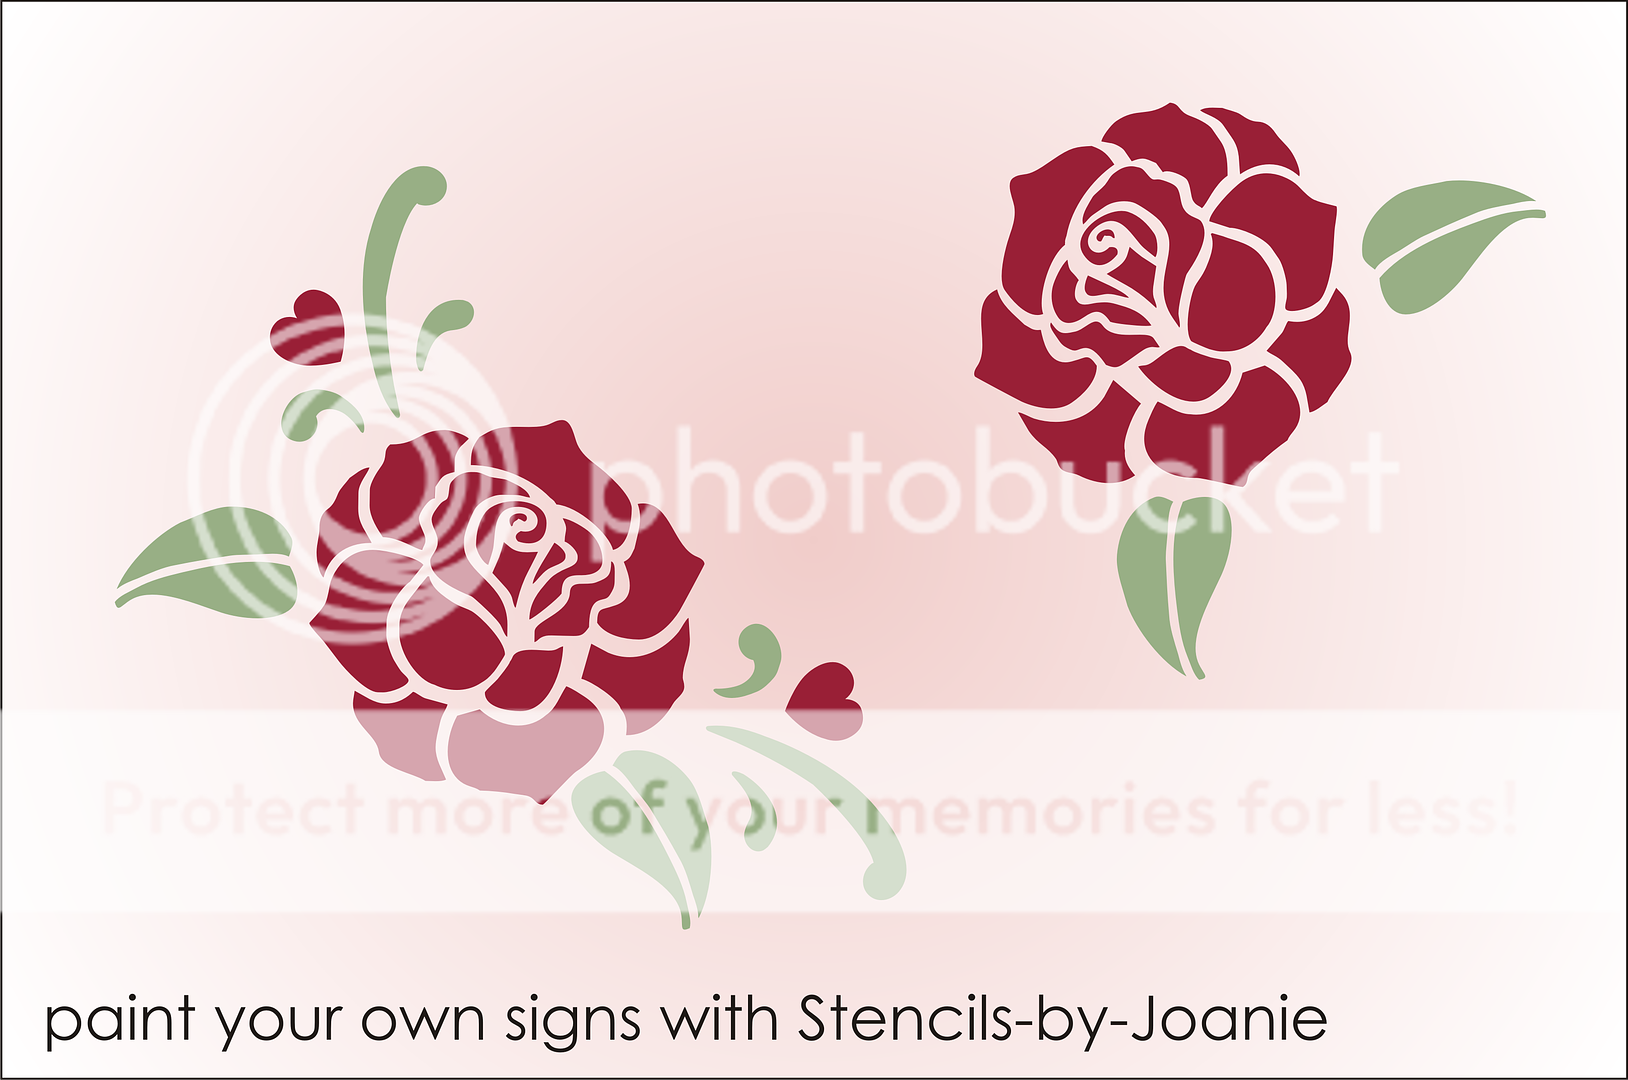 New Stencil shapes #S160 ~ Shabby Cabbage Roses, paint your own easy 